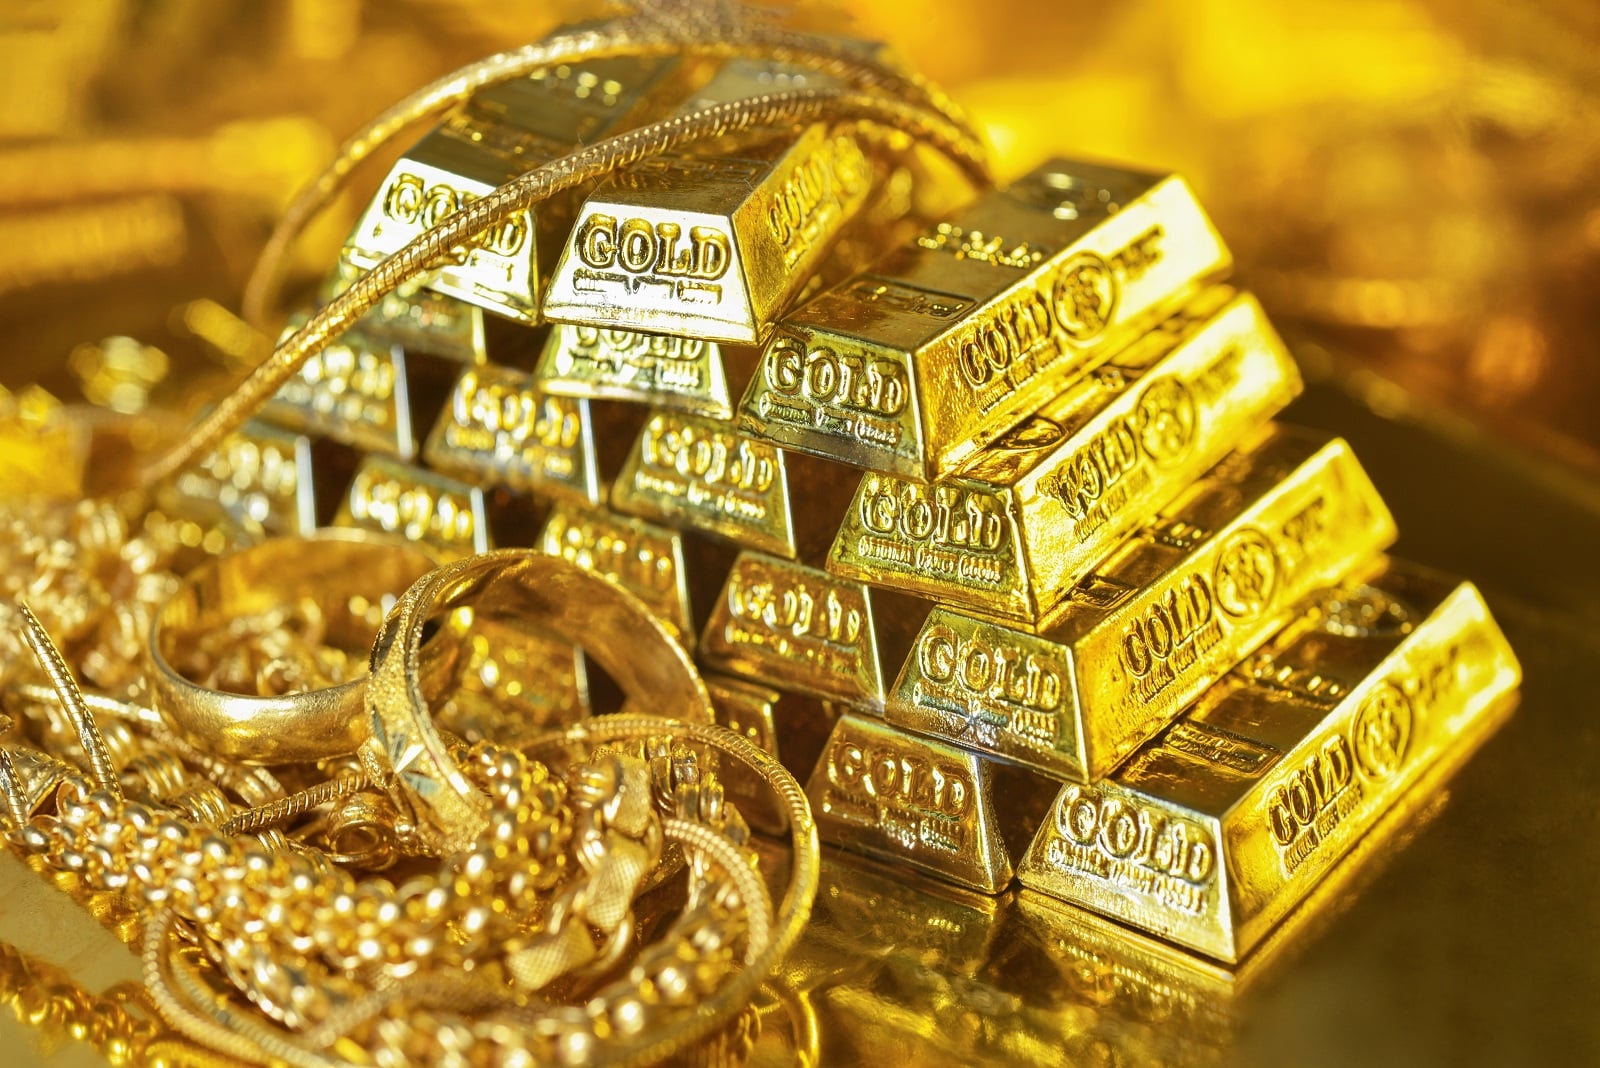 Selling Gold Jewelry vs. Bullion: What You Need to Know